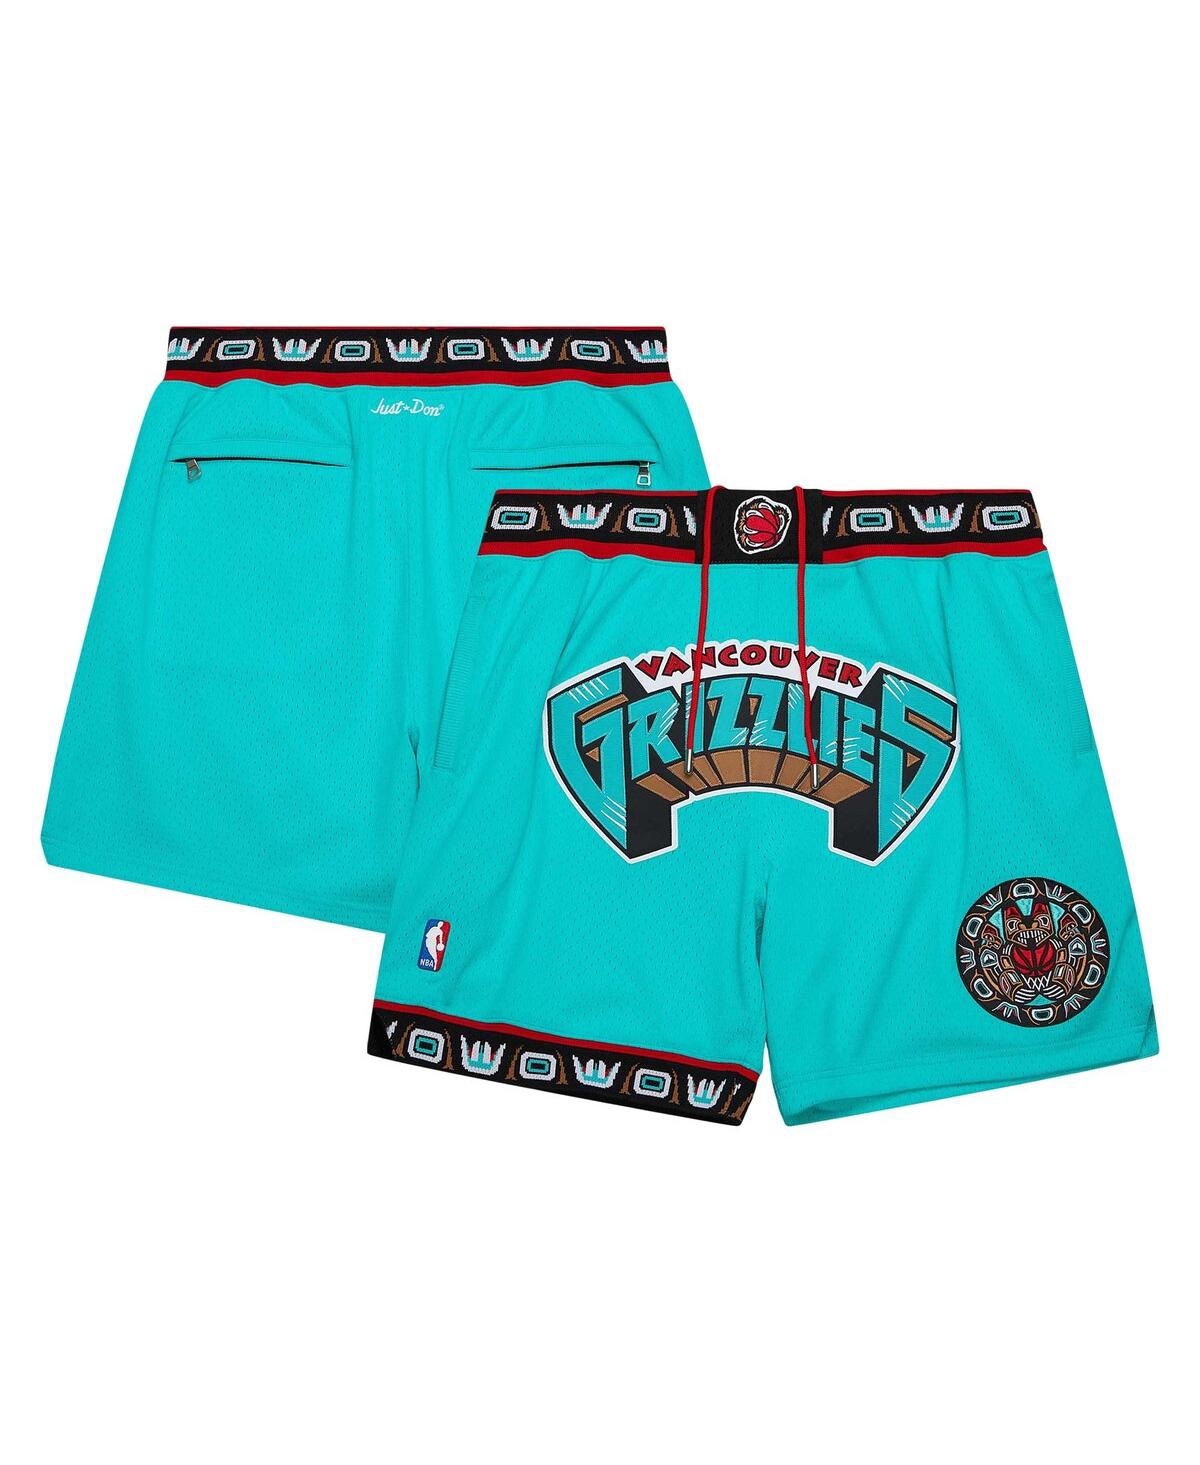 Mitchell Ness Men's Turquoise Vancouver Grizzlies Hardwood Classics Authentic Nba x Just Don Mesh Shorts - Turquoise